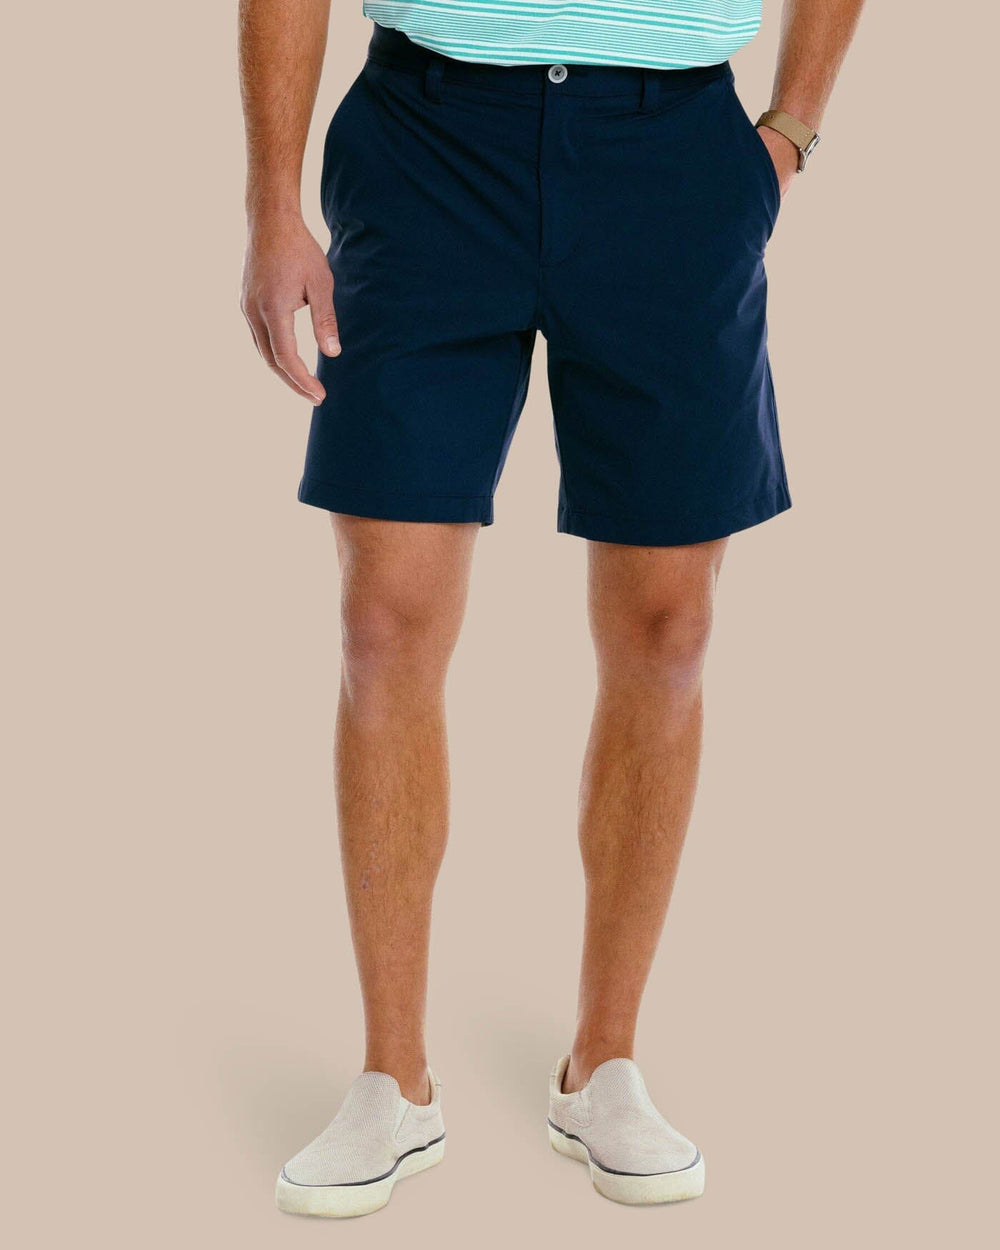 The front of the Men's Gulf 8 Inch Brrr Performance Short by Southern Tide - True Navy